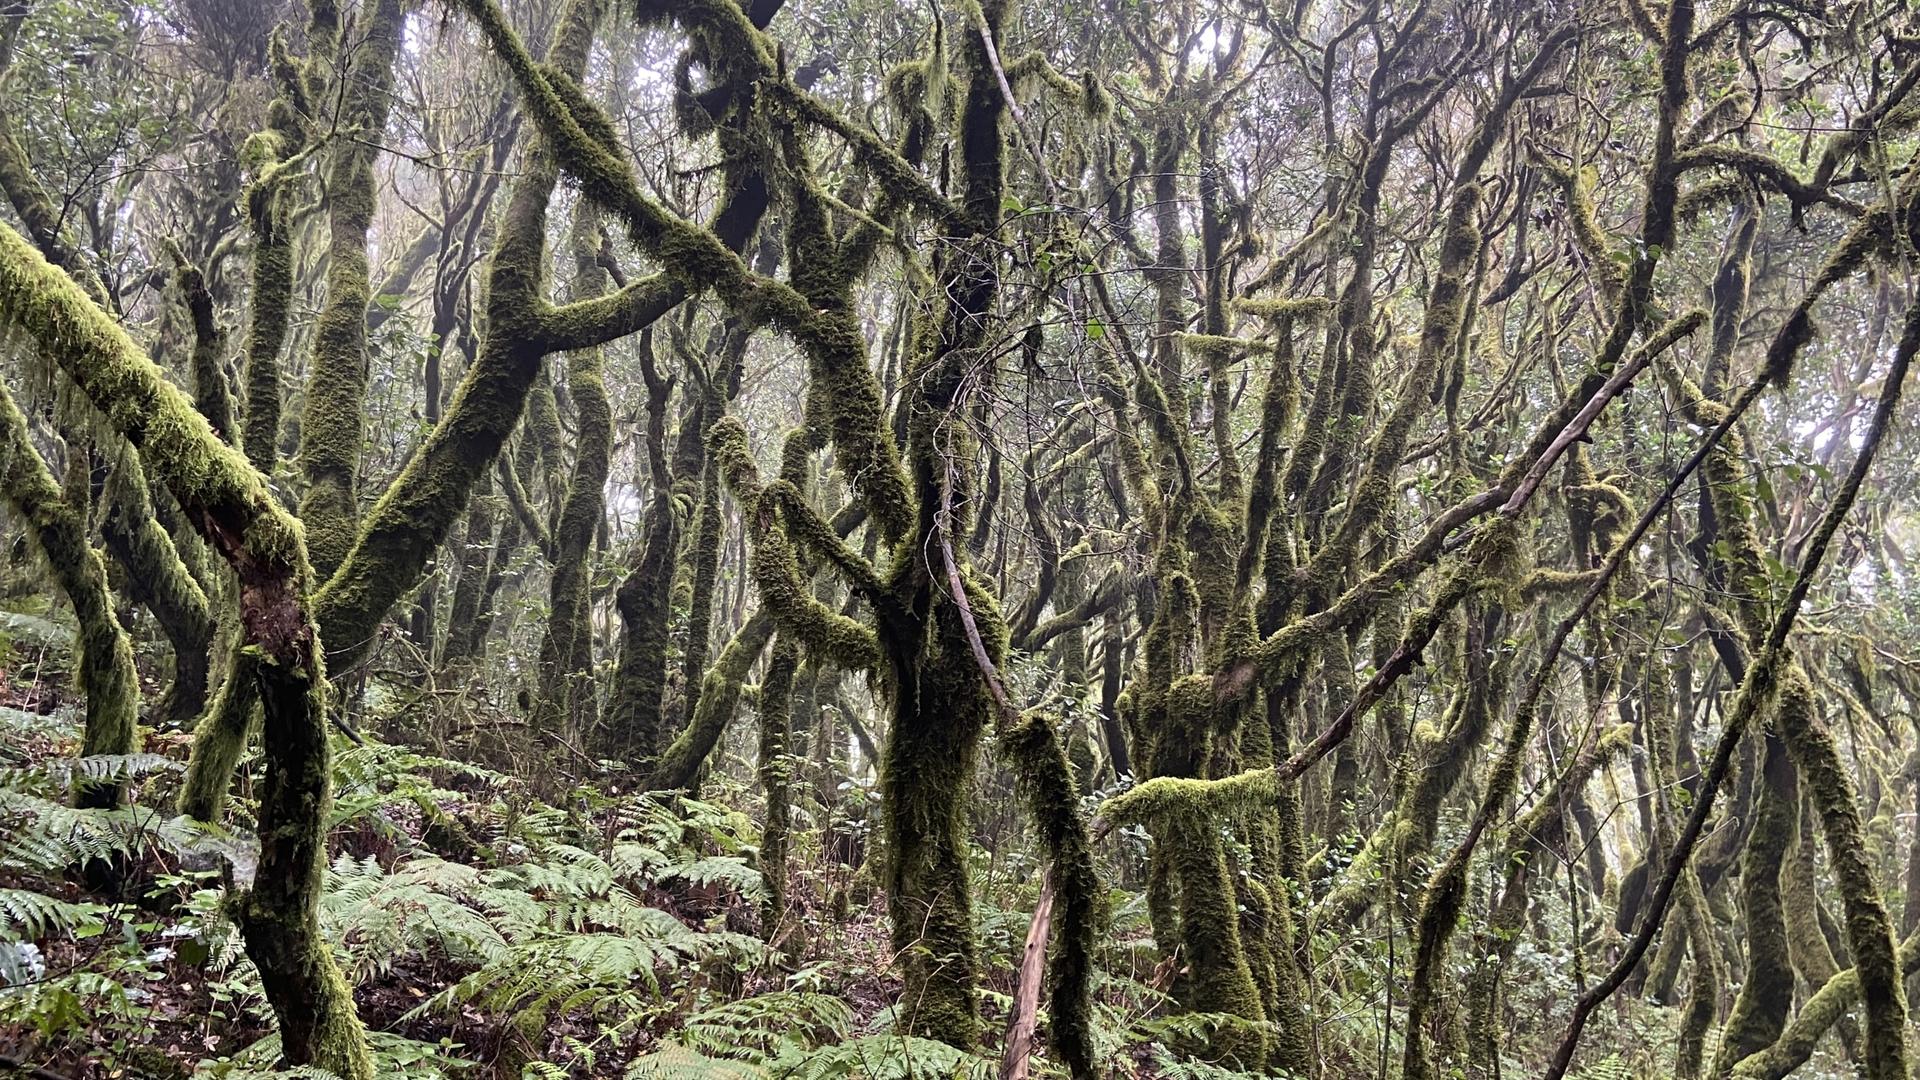 The Laurel Forest hasn't changed much since the Tertiary period some 66 million years ago.